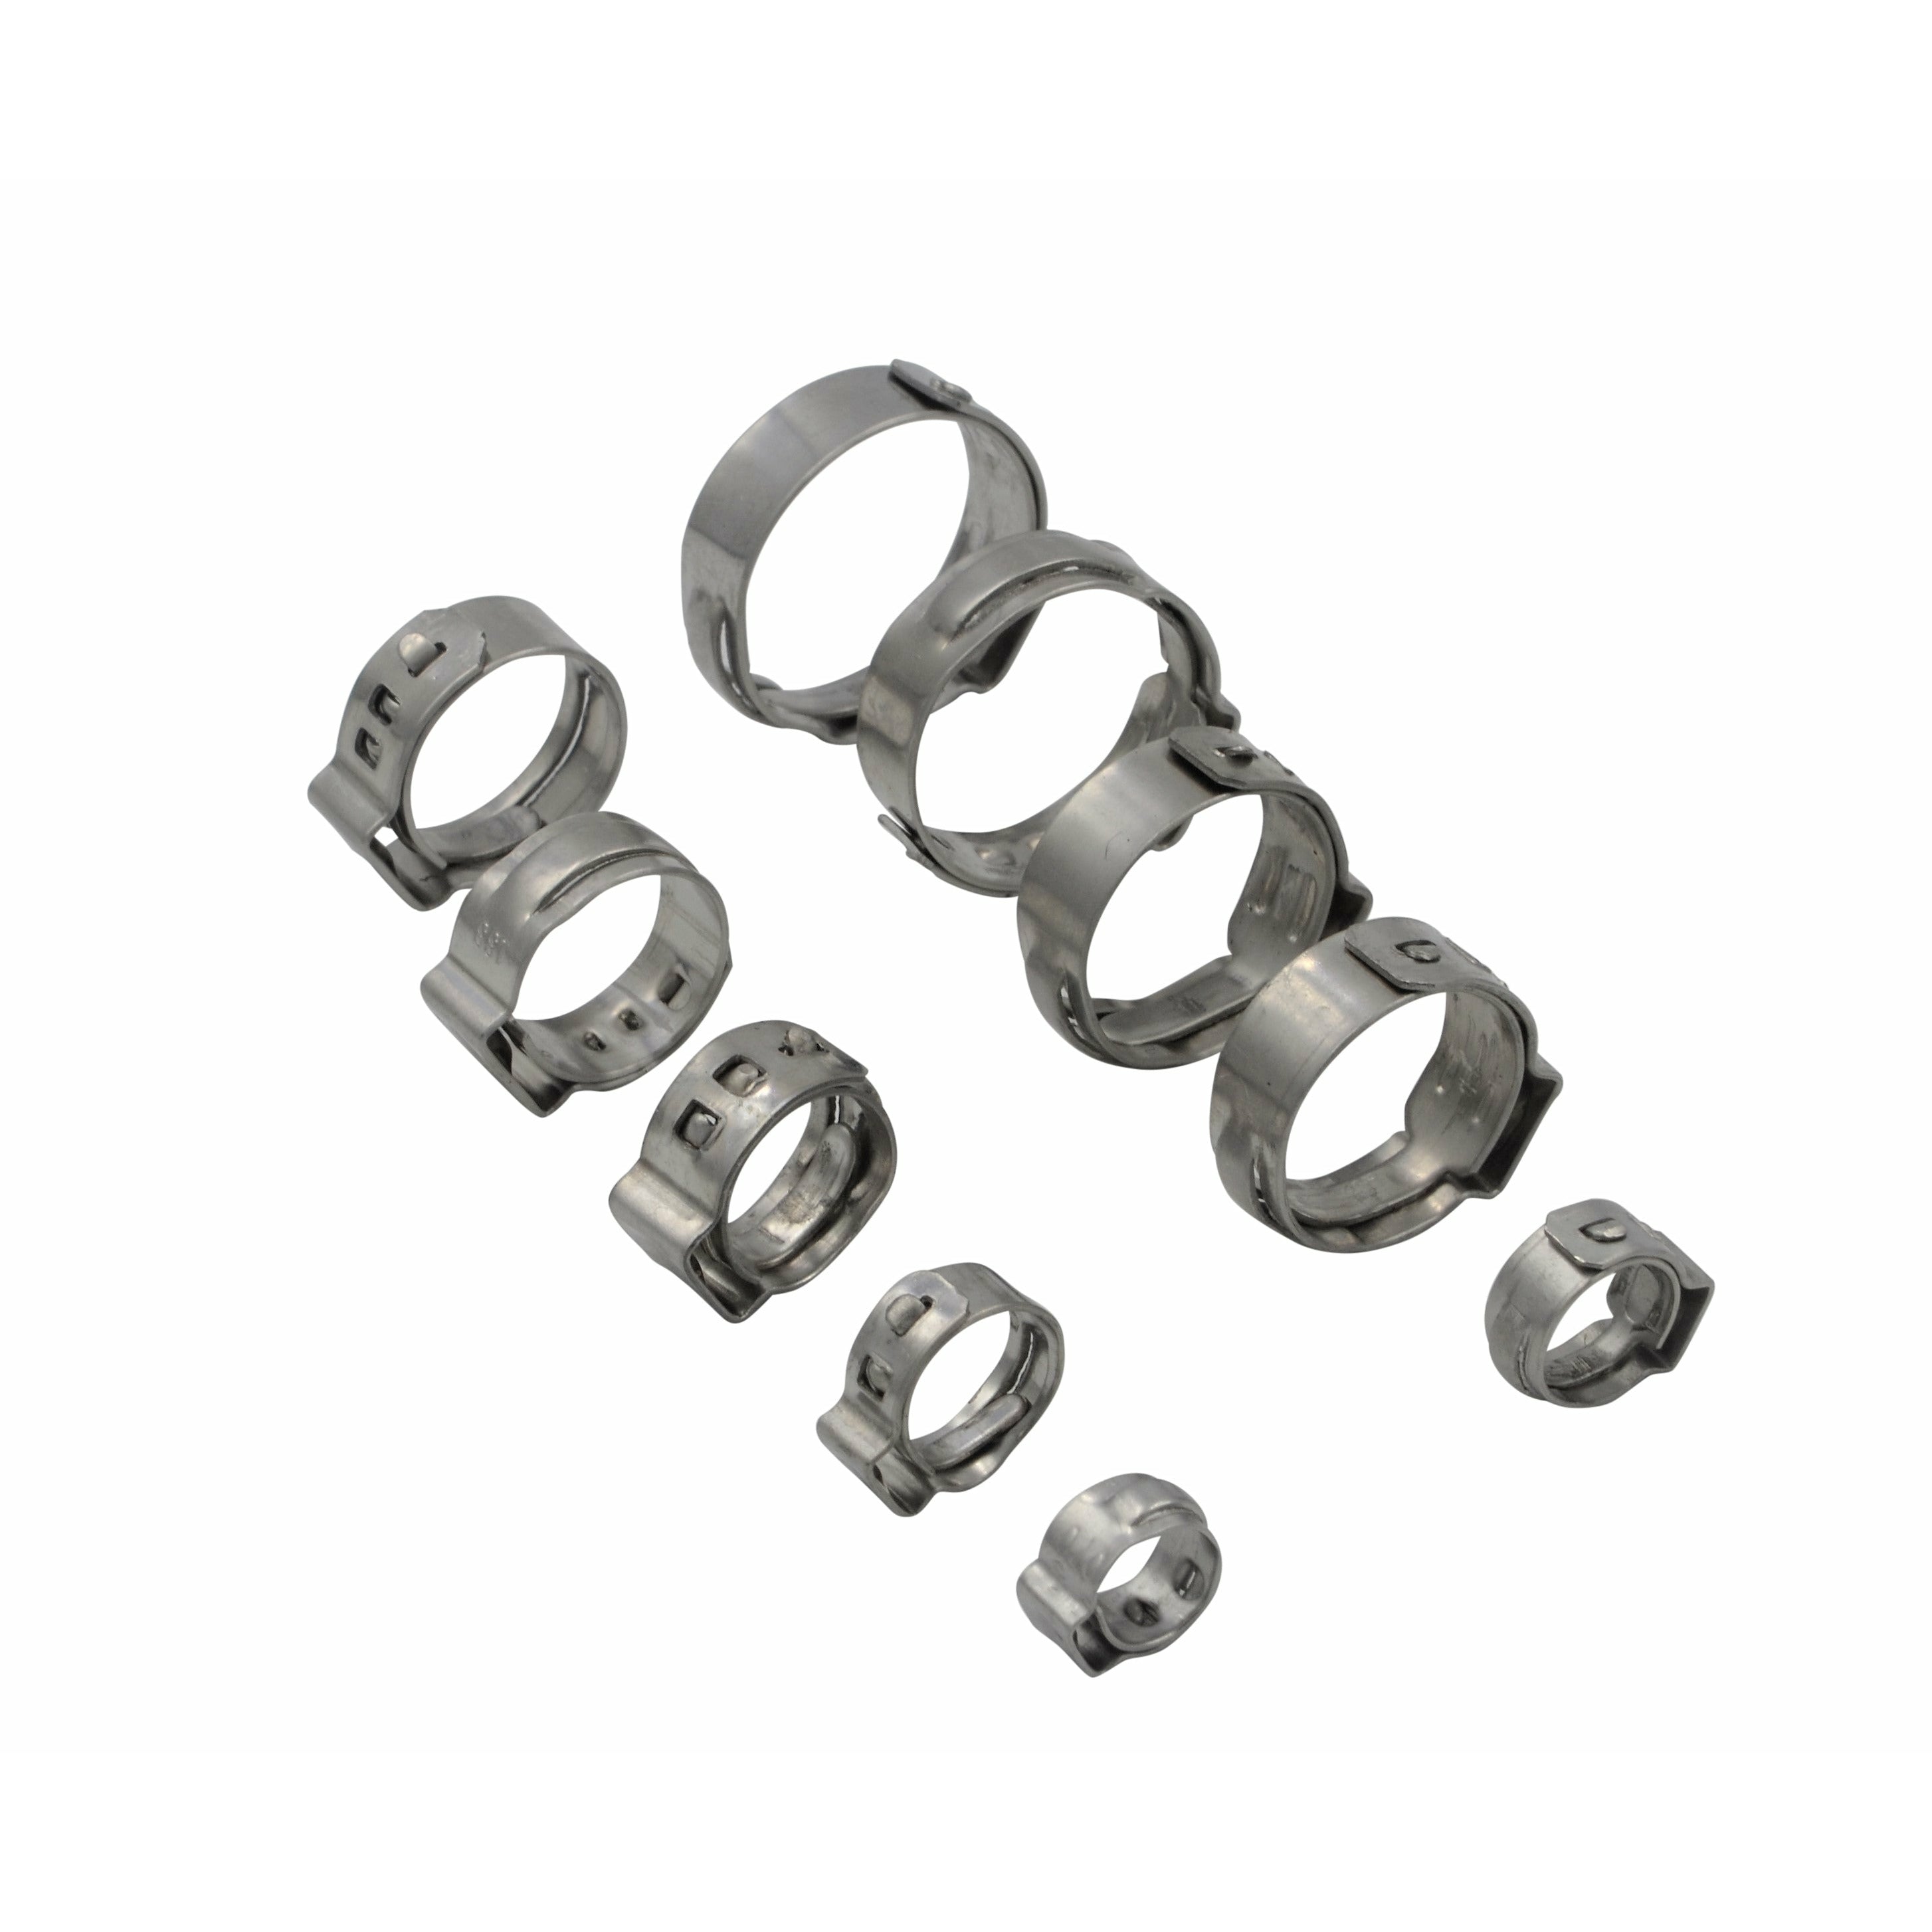 100 Piece 304 Stainless Steel 14.5-17mm Ear Hose Clamp Grab Kit Assortment